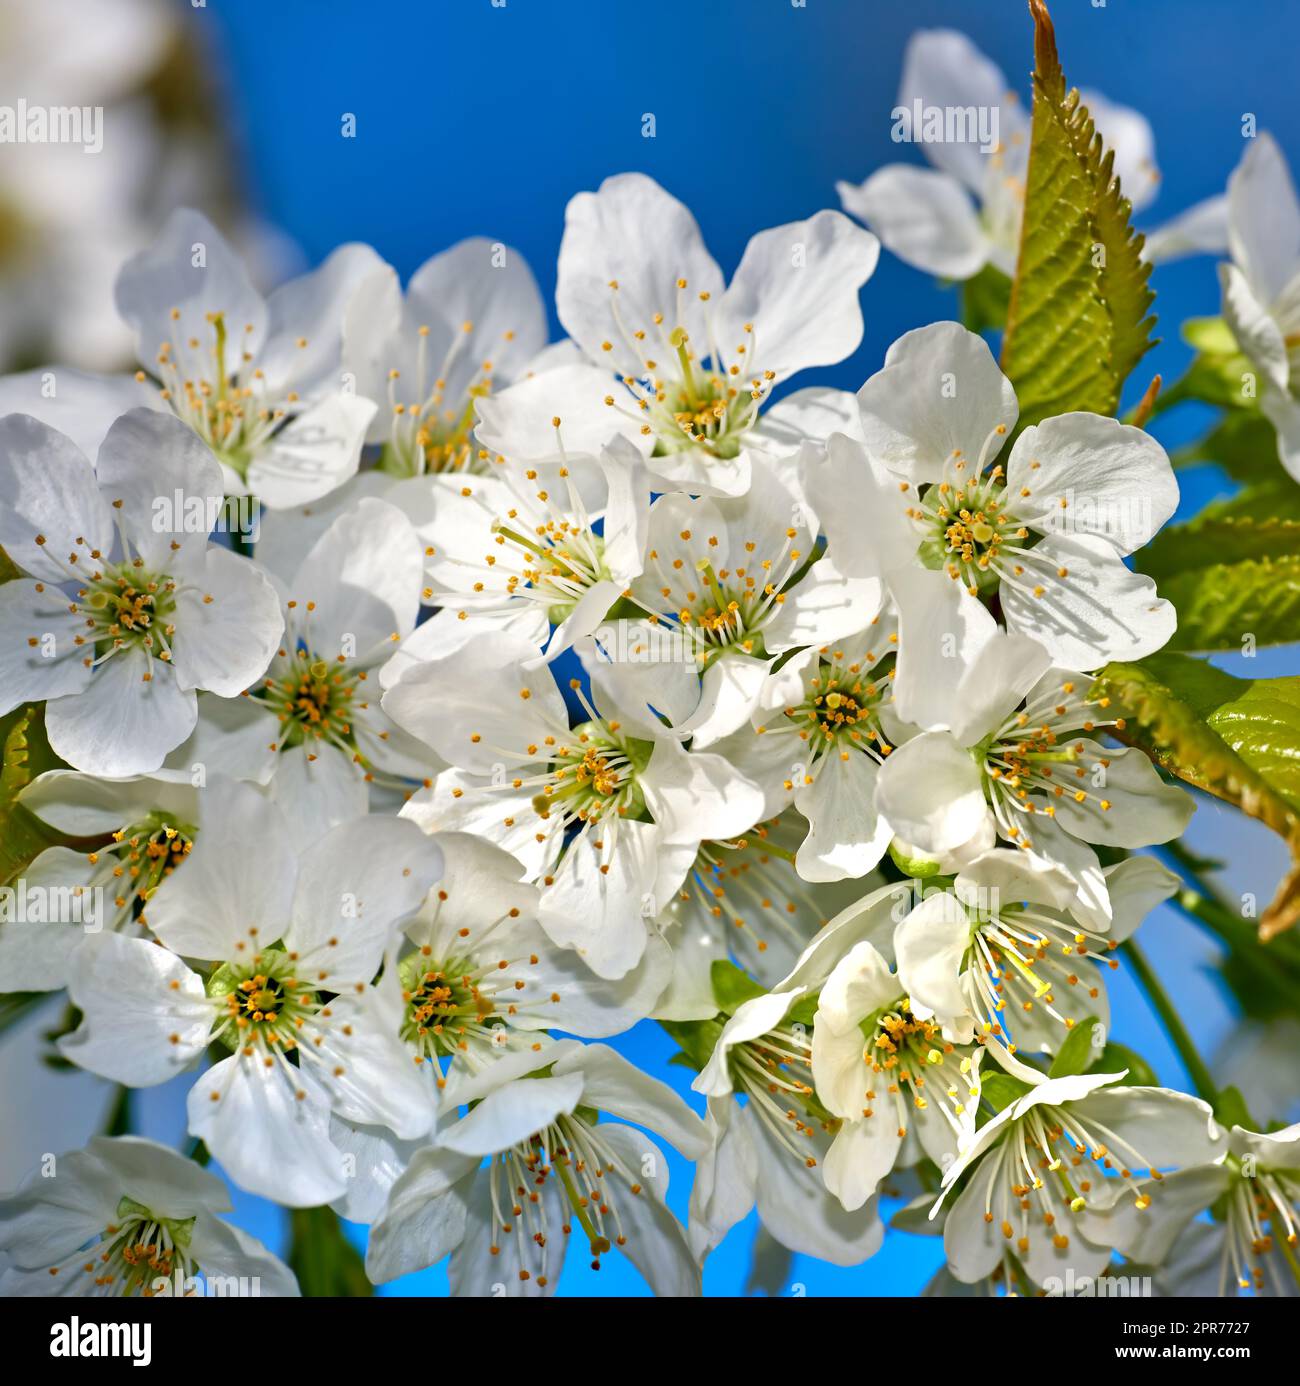 Blooming Mirabelle plum or Prunus Domestica flower in a garden in springtime. Flowering fruit tree with white flowerheads with a blue sky background on a sunny day. Plants or flora growing outdoors Stock Photo